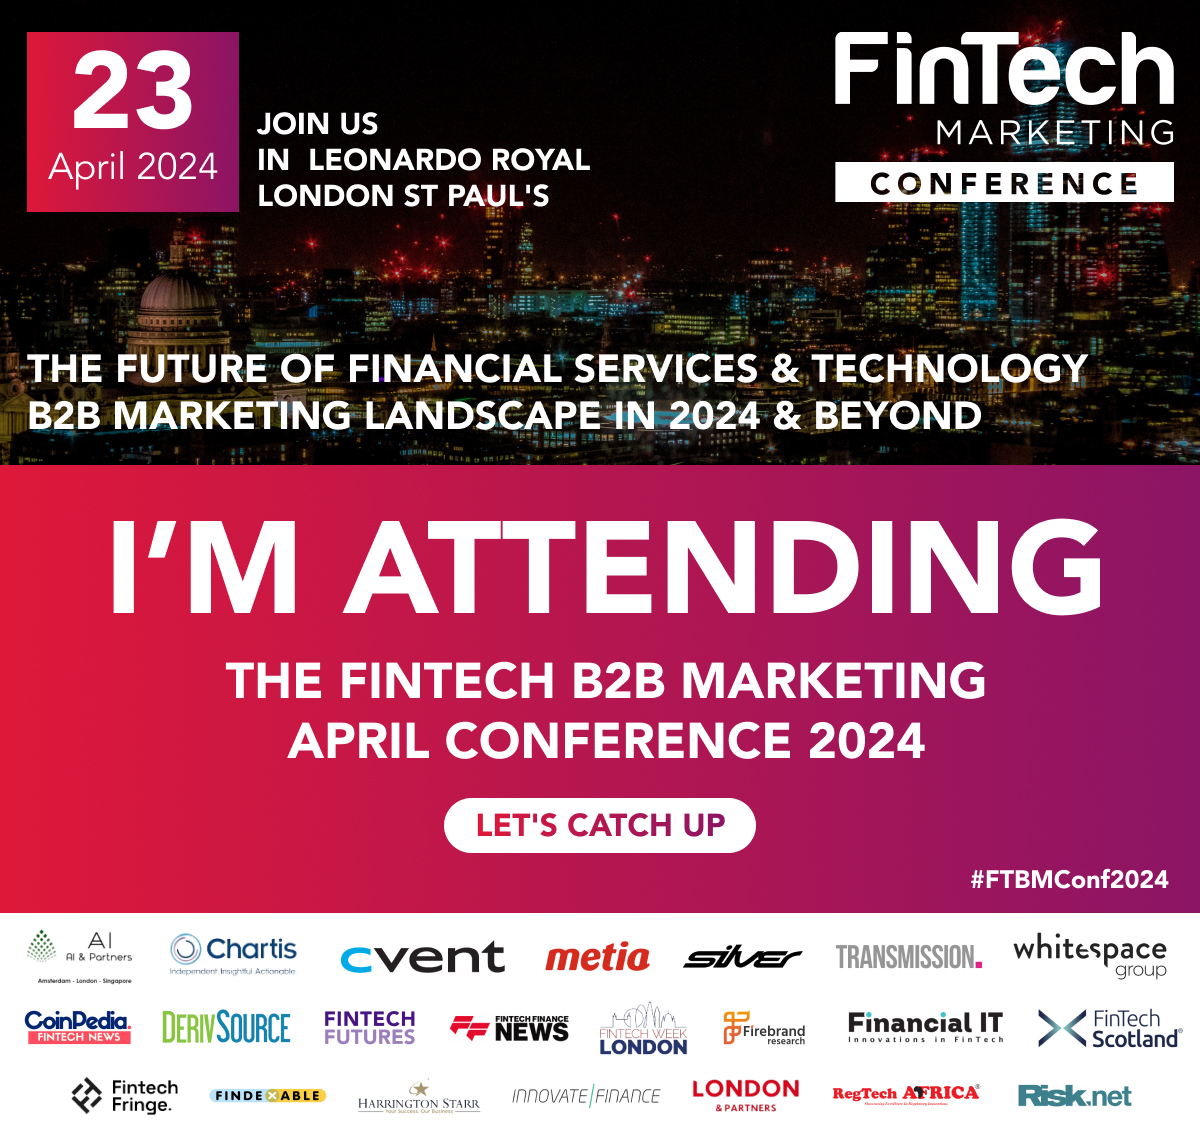 FinTech Futures is gearing up for the FinTech Marketing Conference next week! 🌟 Visit our stand to explore the latest trends, innovations, and insights shaping the future of financial technology. See you there! #FinTech #Marketing